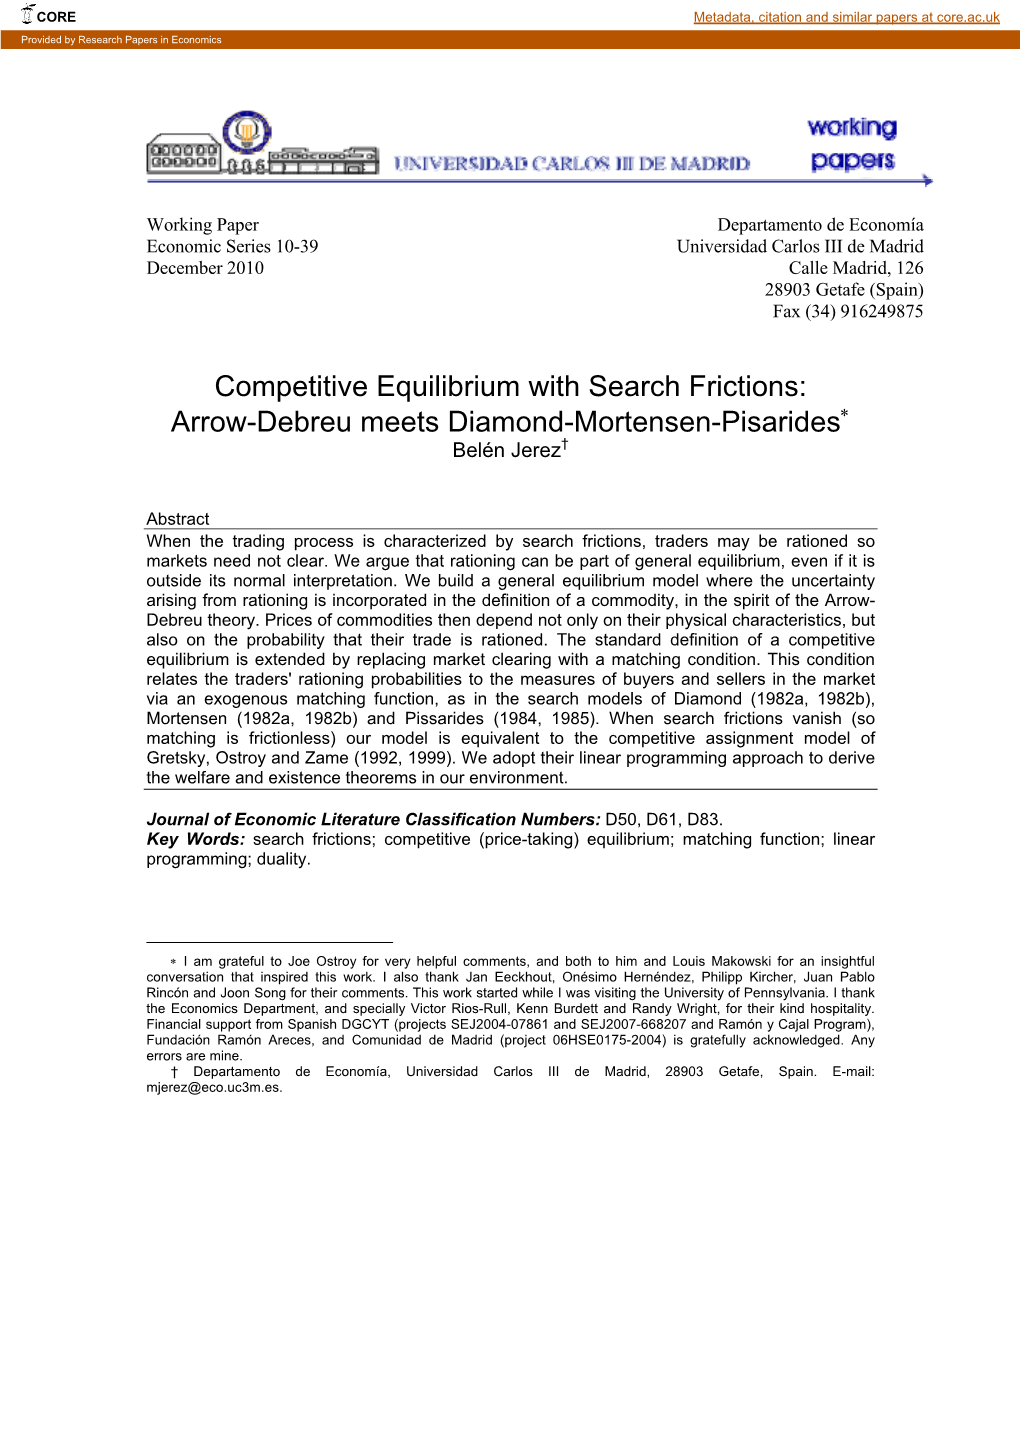 Competitive Equilibrium with Search Frictions: Arrow-Debreu Meets